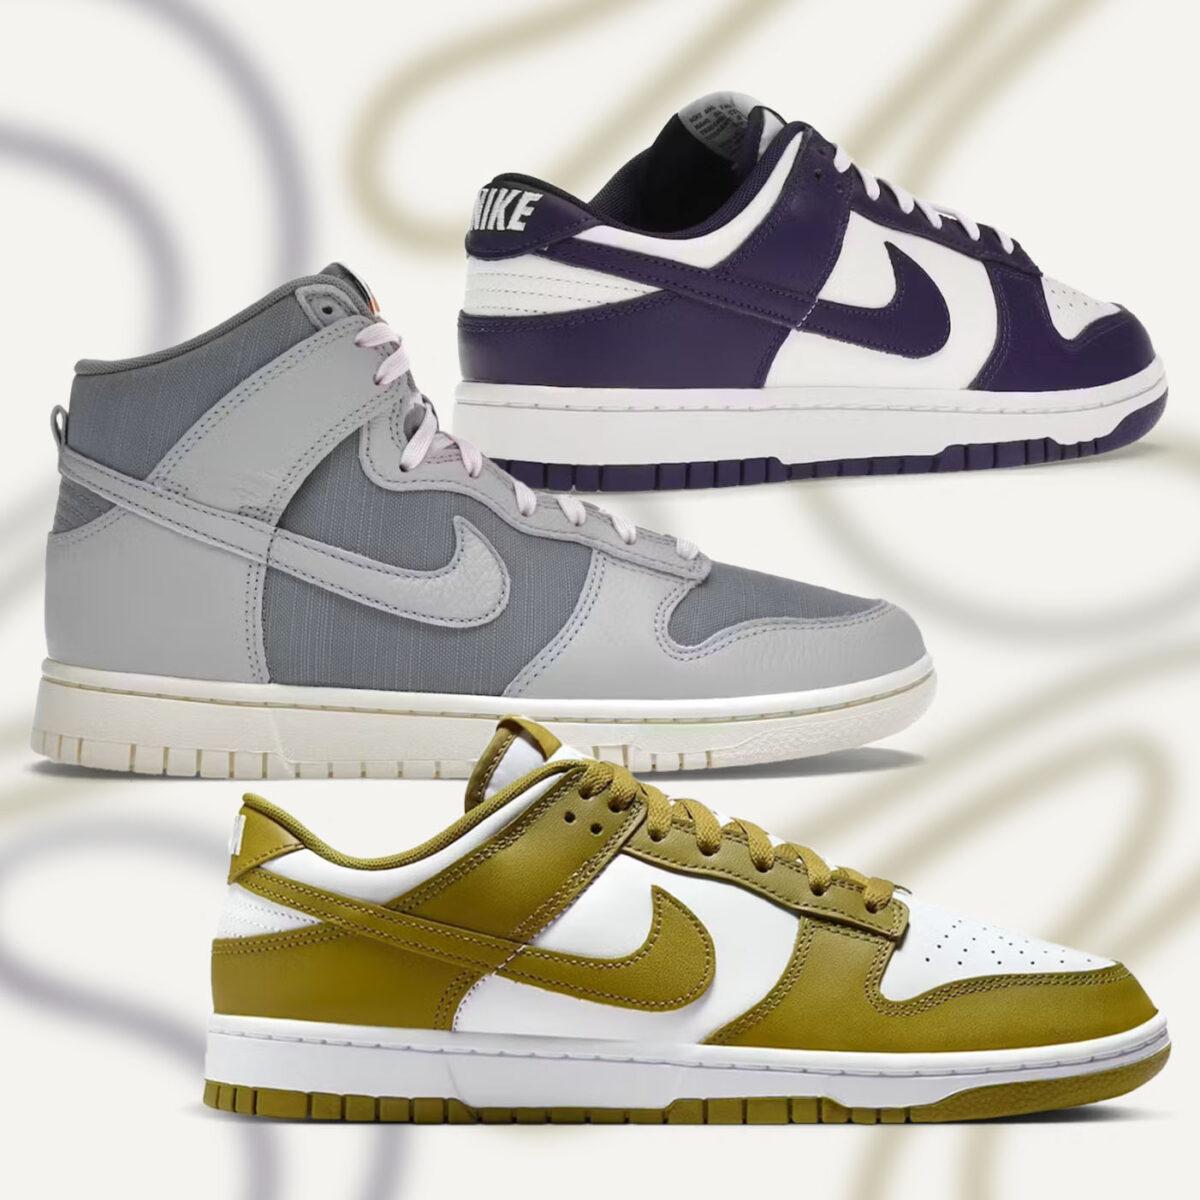 Best Nike Dunk Low Deals on StockX Right Now - StockX News